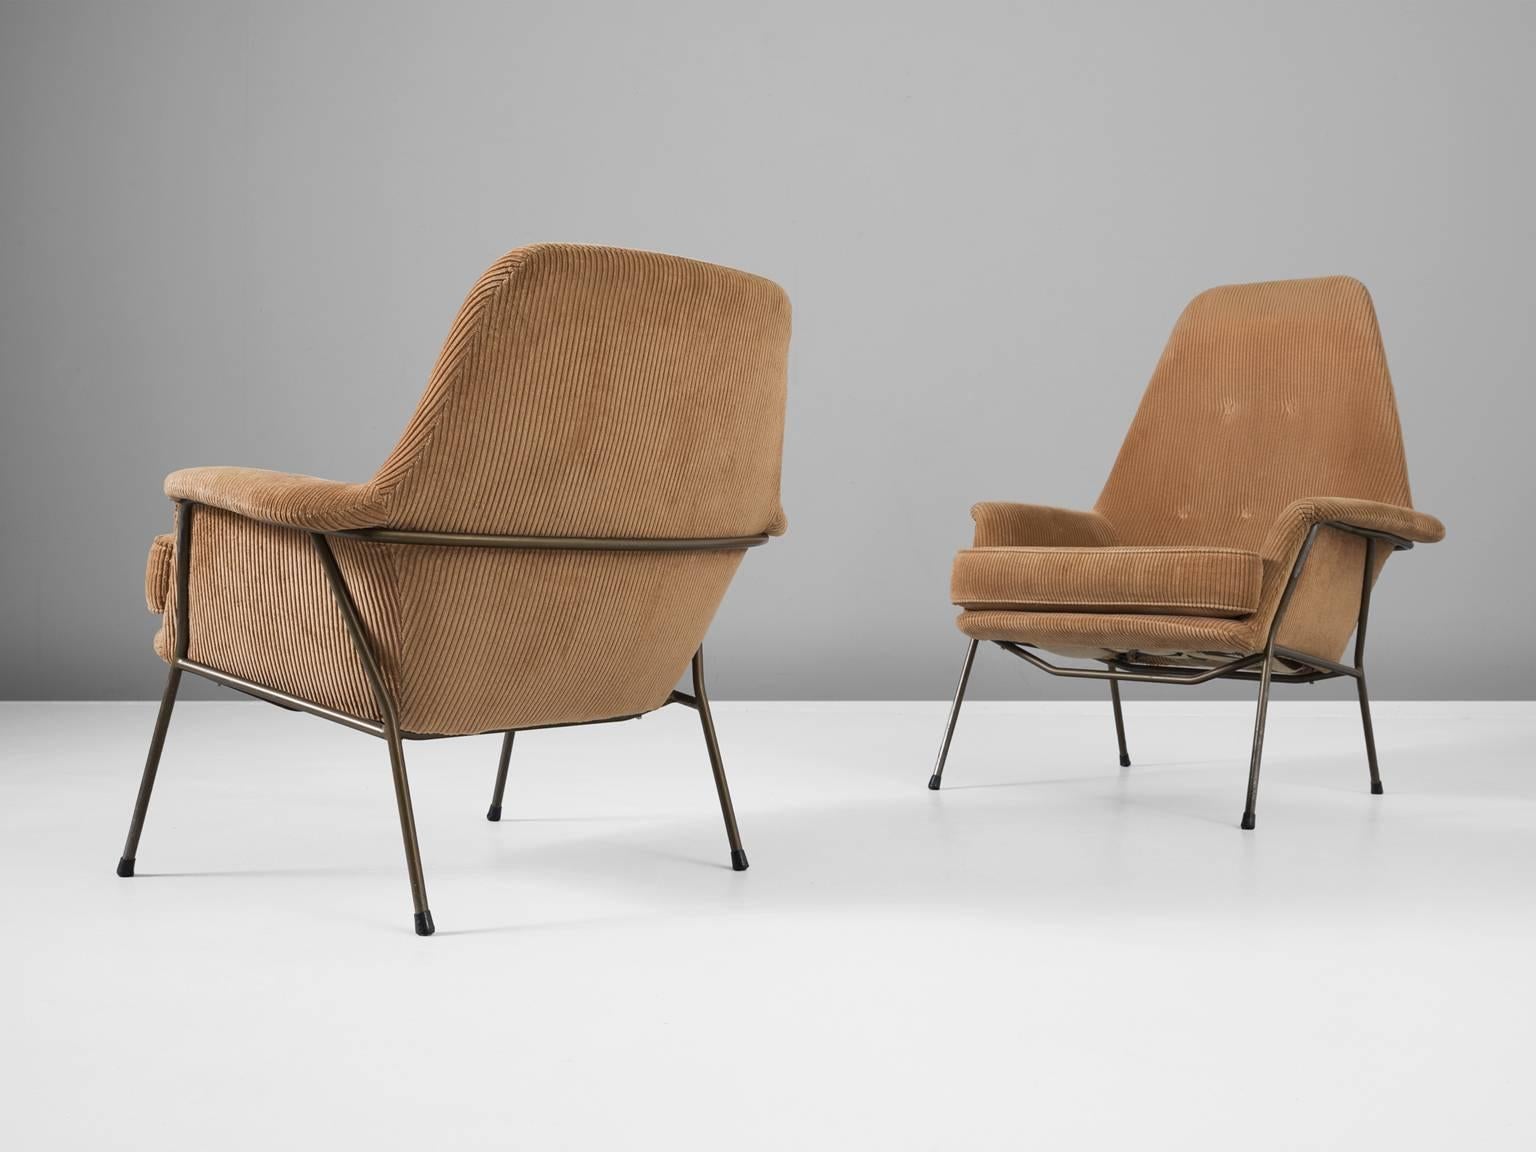 Set of two armchairs, in metal and fabric by J. van Ginteren for Gelderland, 1960s, the Netherlands 

A pair of armchairs, his and hers, for the Dutch manufacturer Gelderland. These armchairs have a true Mid-Century Modern appearance due their